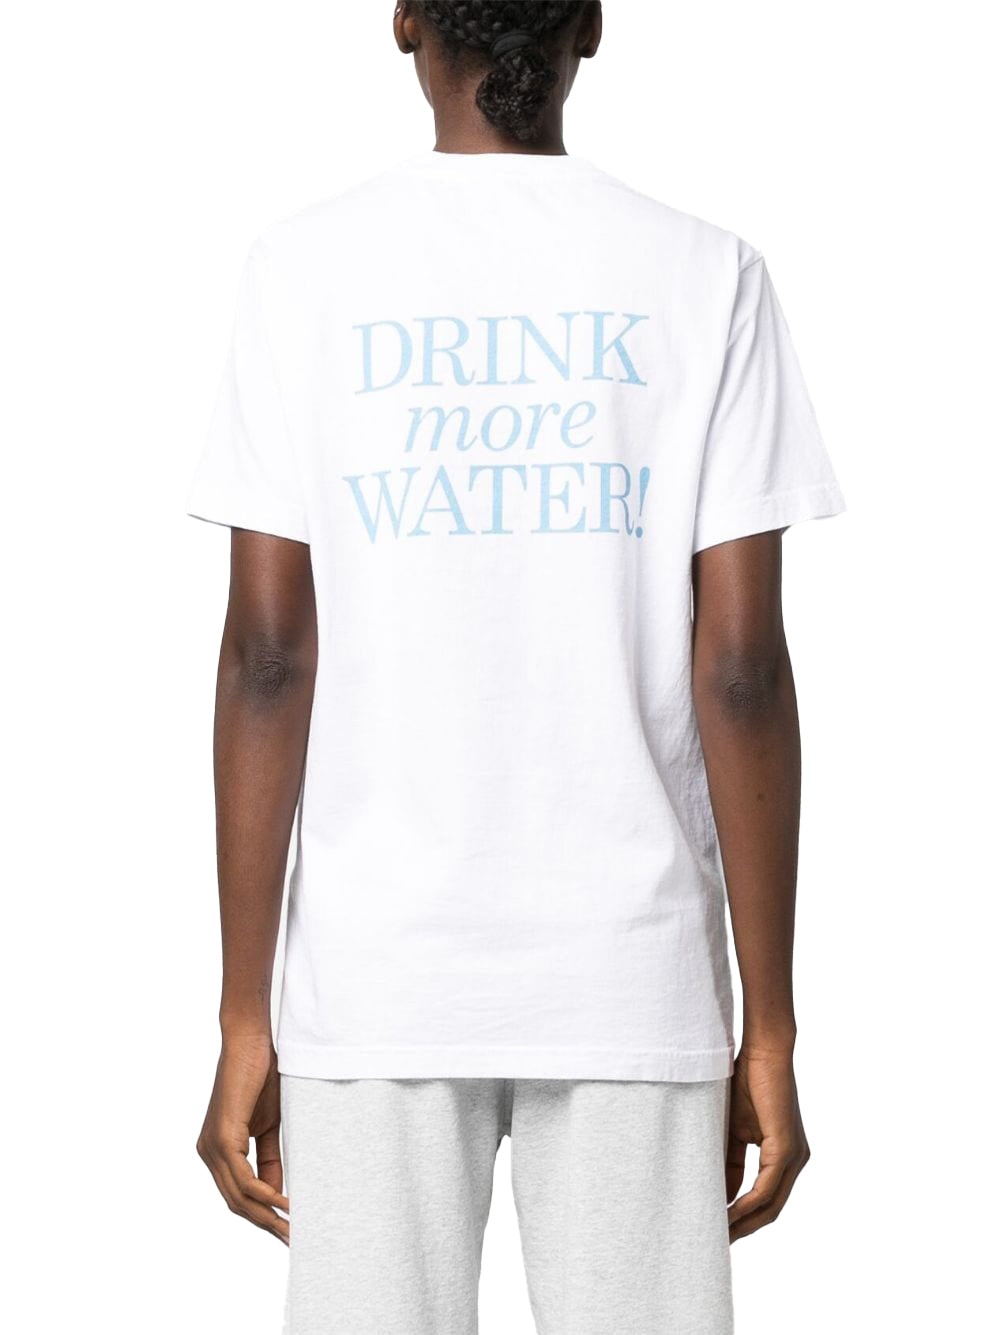 T.shirt Drink Water